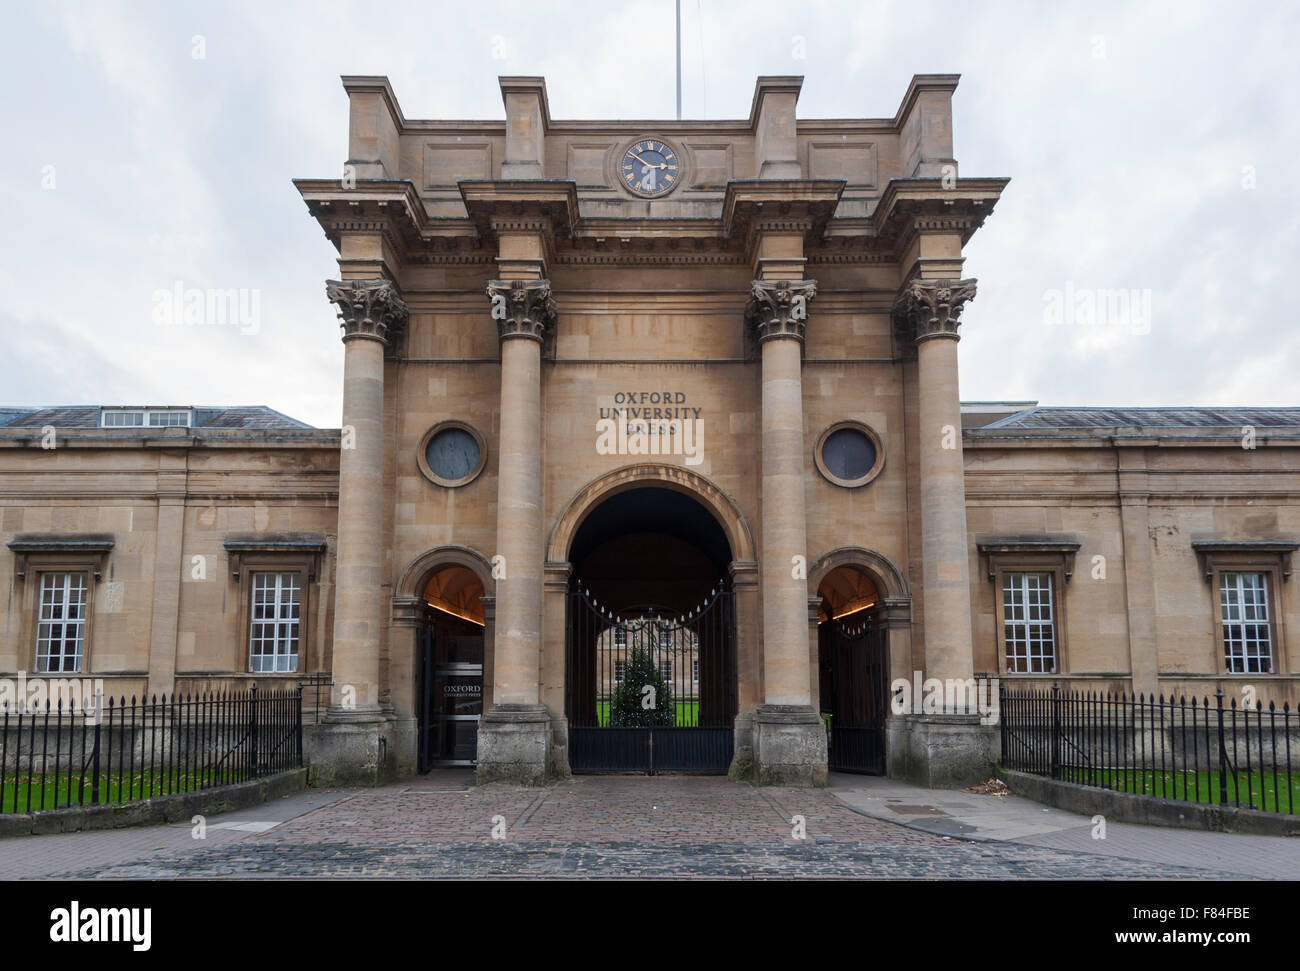 Oxford university press oup hi-res stock photography and images - Alamy